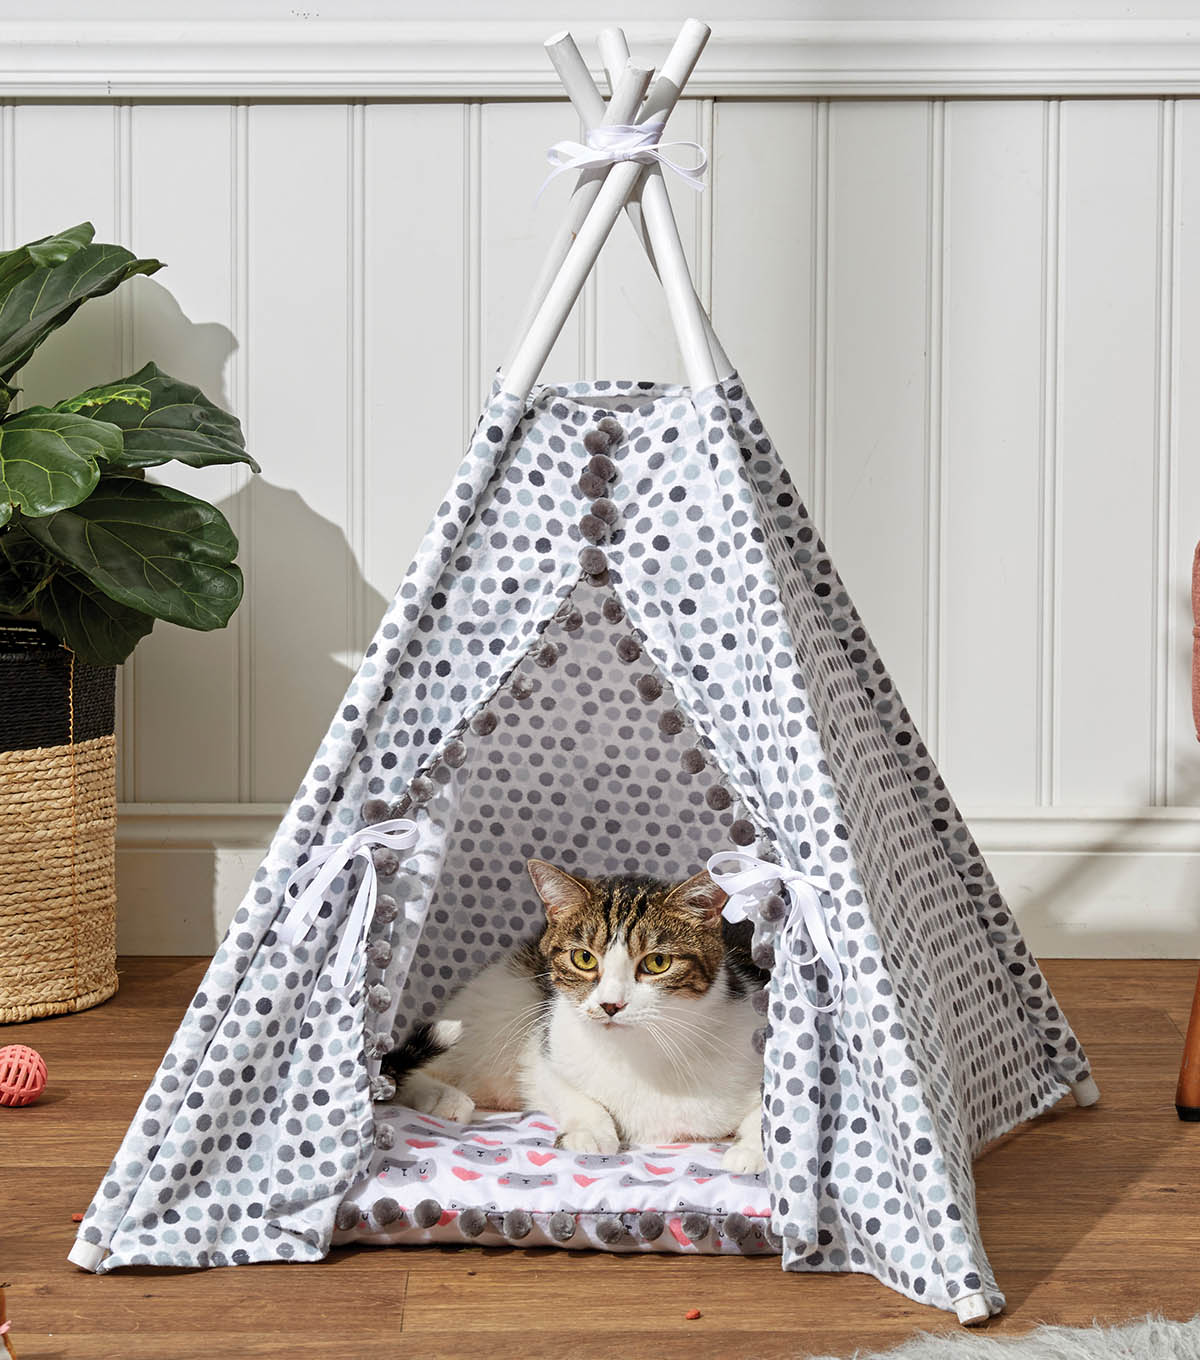 DIY Fabric Pet Teepee House Free Sewing Patterns